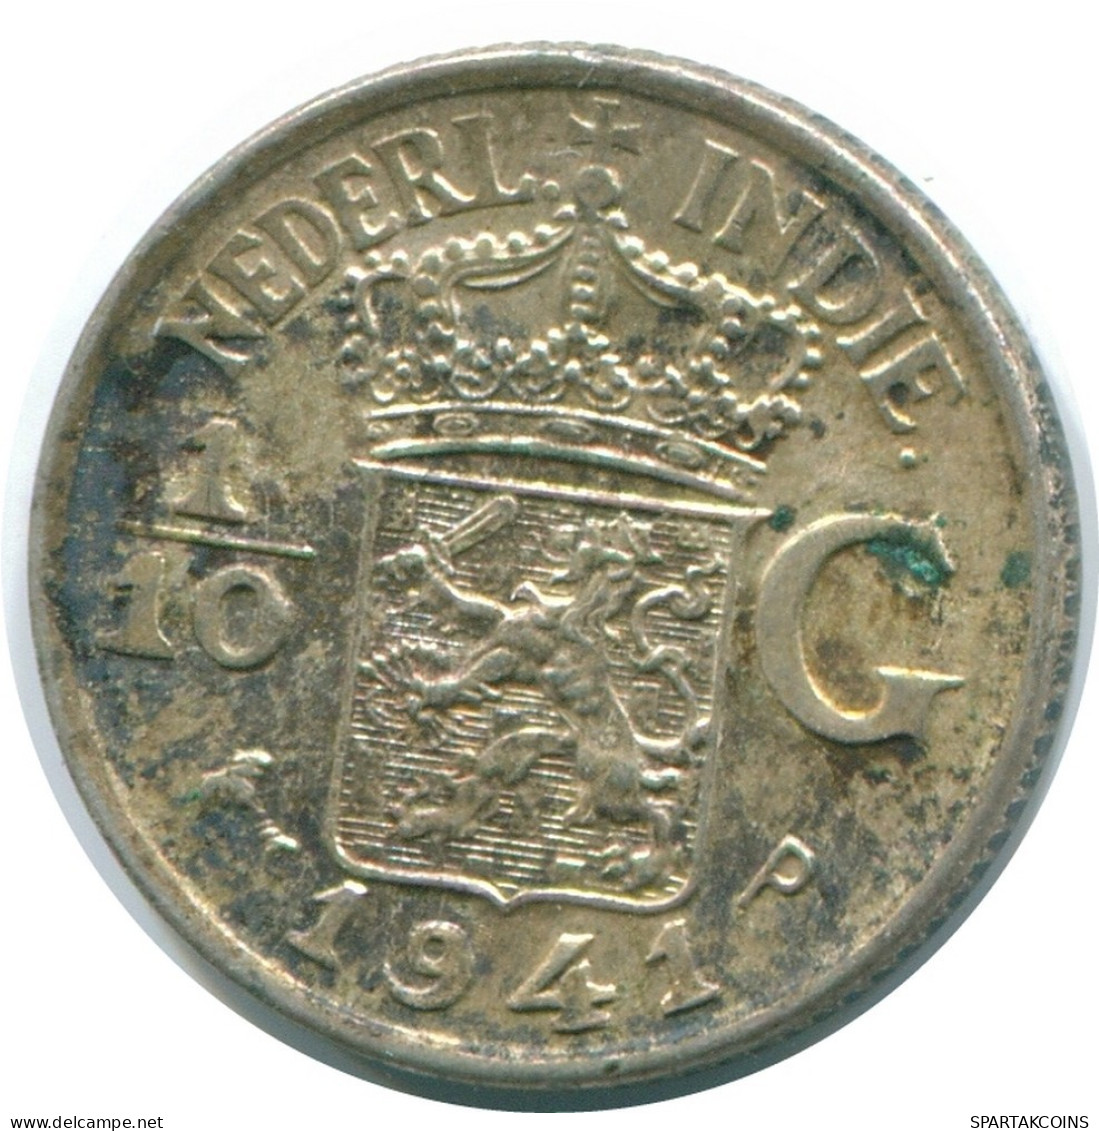 1/10 GULDEN 1941 P NETHERLANDS EAST INDIES SILVER Colonial Coin #NL13828.3.U.A - Dutch East Indies